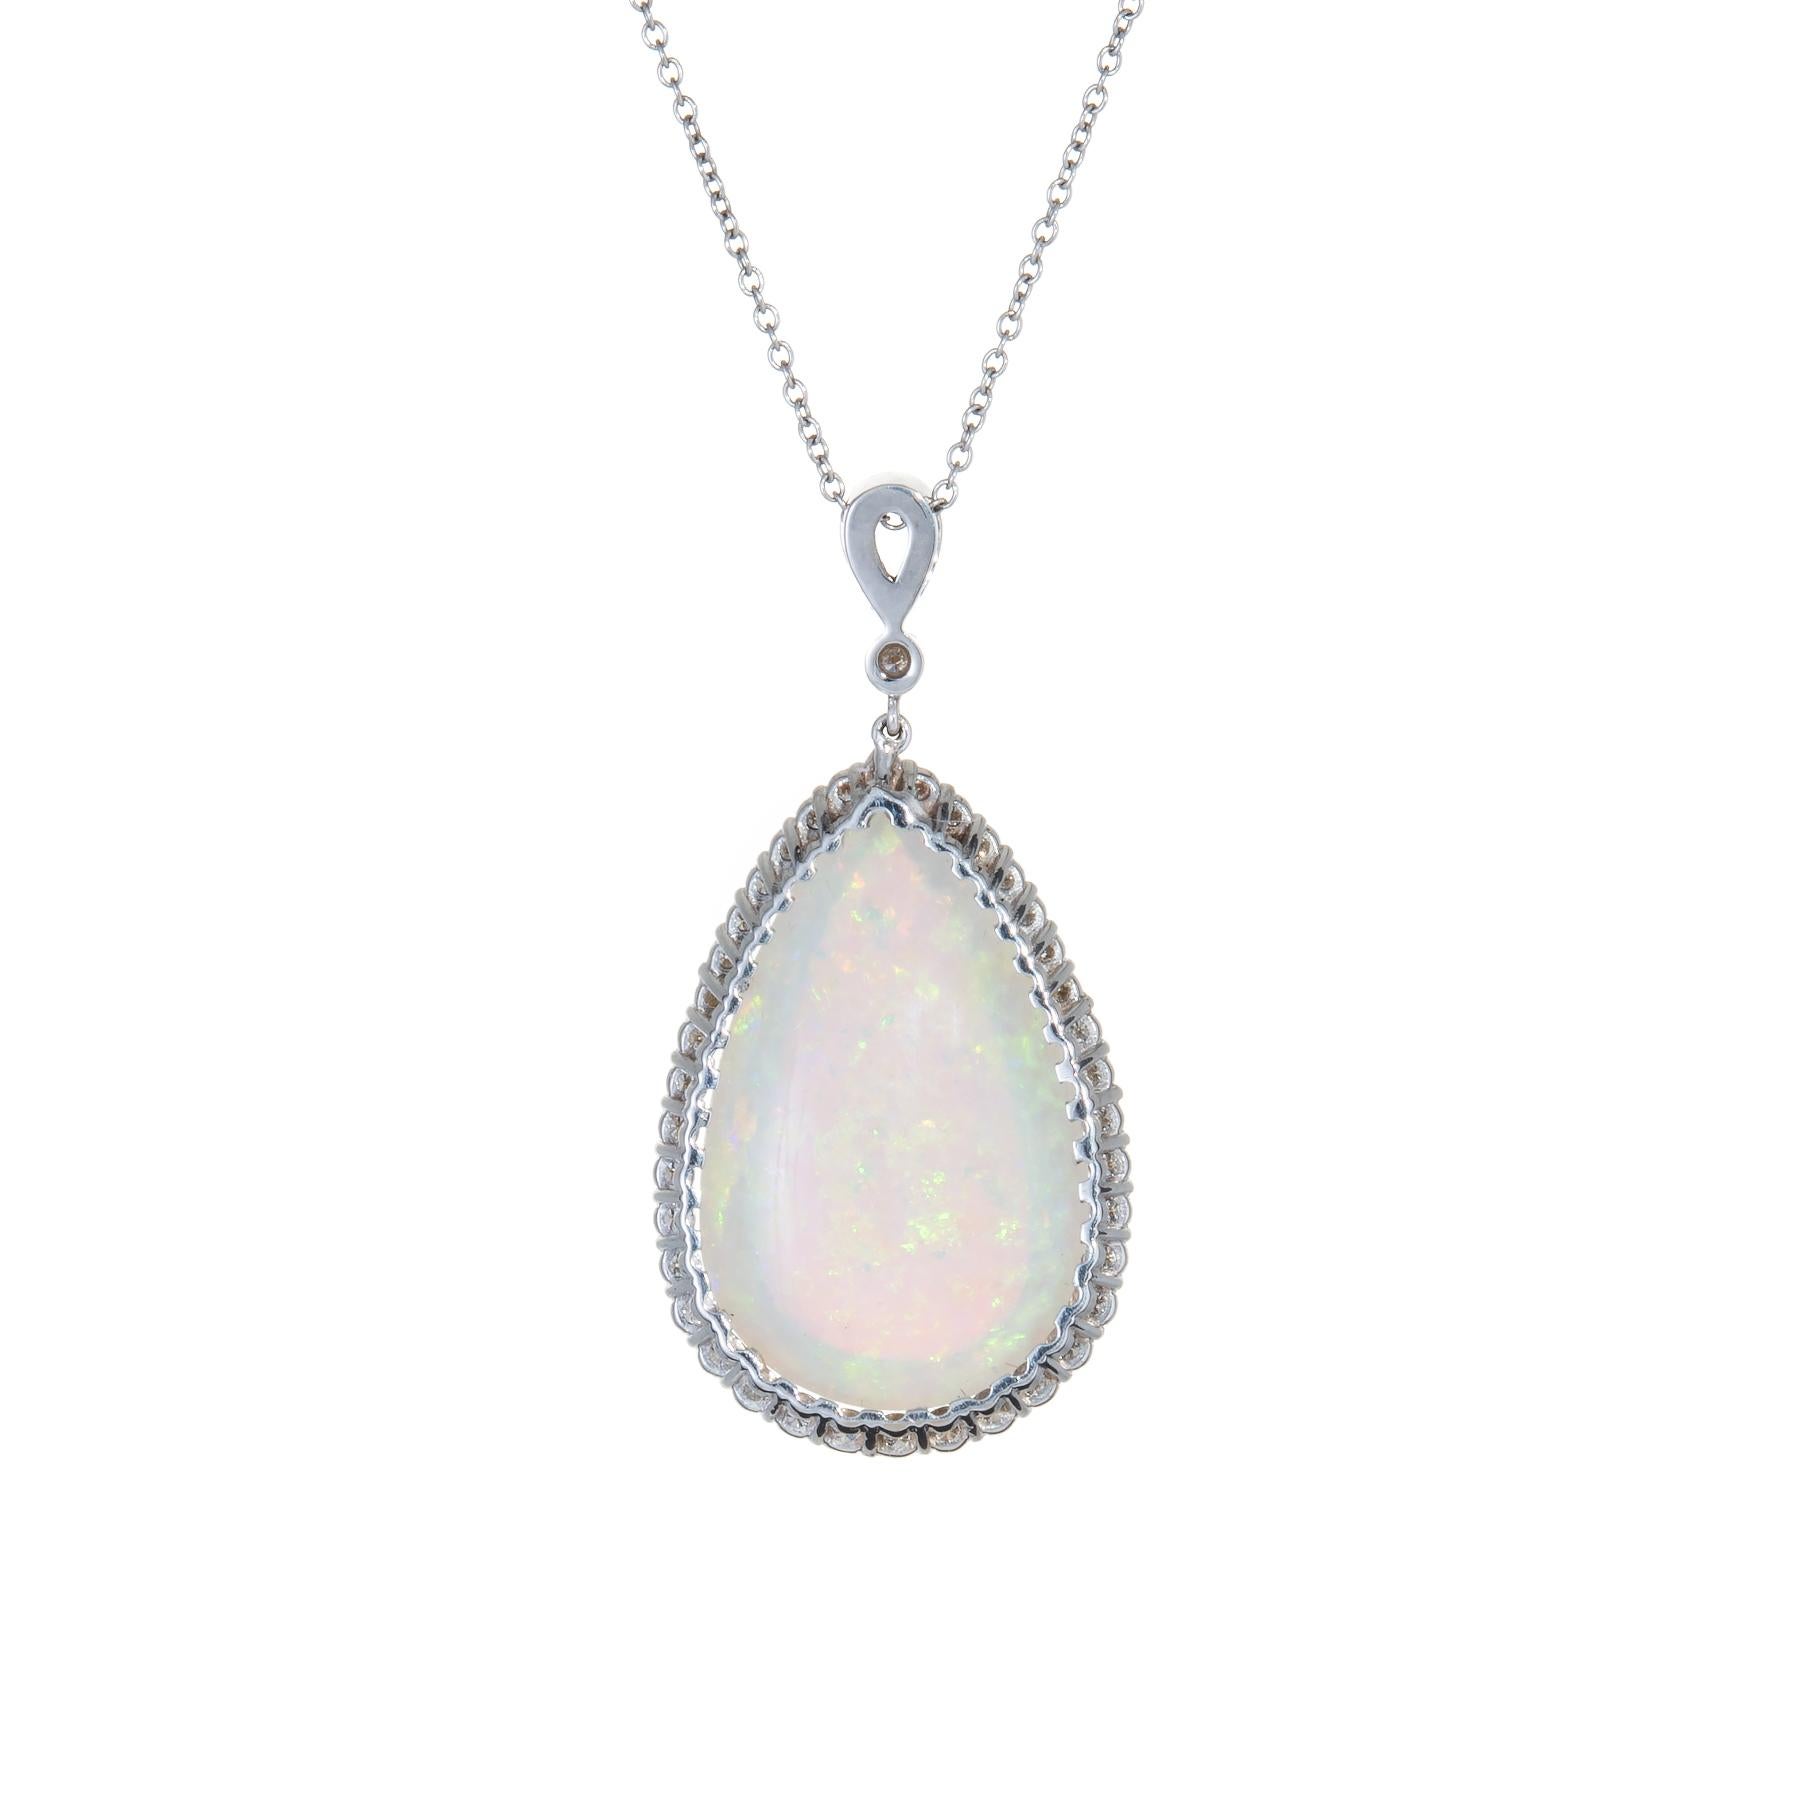 Finely detailed gemstone necklace, crafted in 14 karat white gold.  

Cabochon cut Pear shaped natural opal measures 30mm x 19mm (estimated at 25.69 carats), accented with an estimated 2.25 carats of diamonds (estimated at G-H color and VS2-SI1